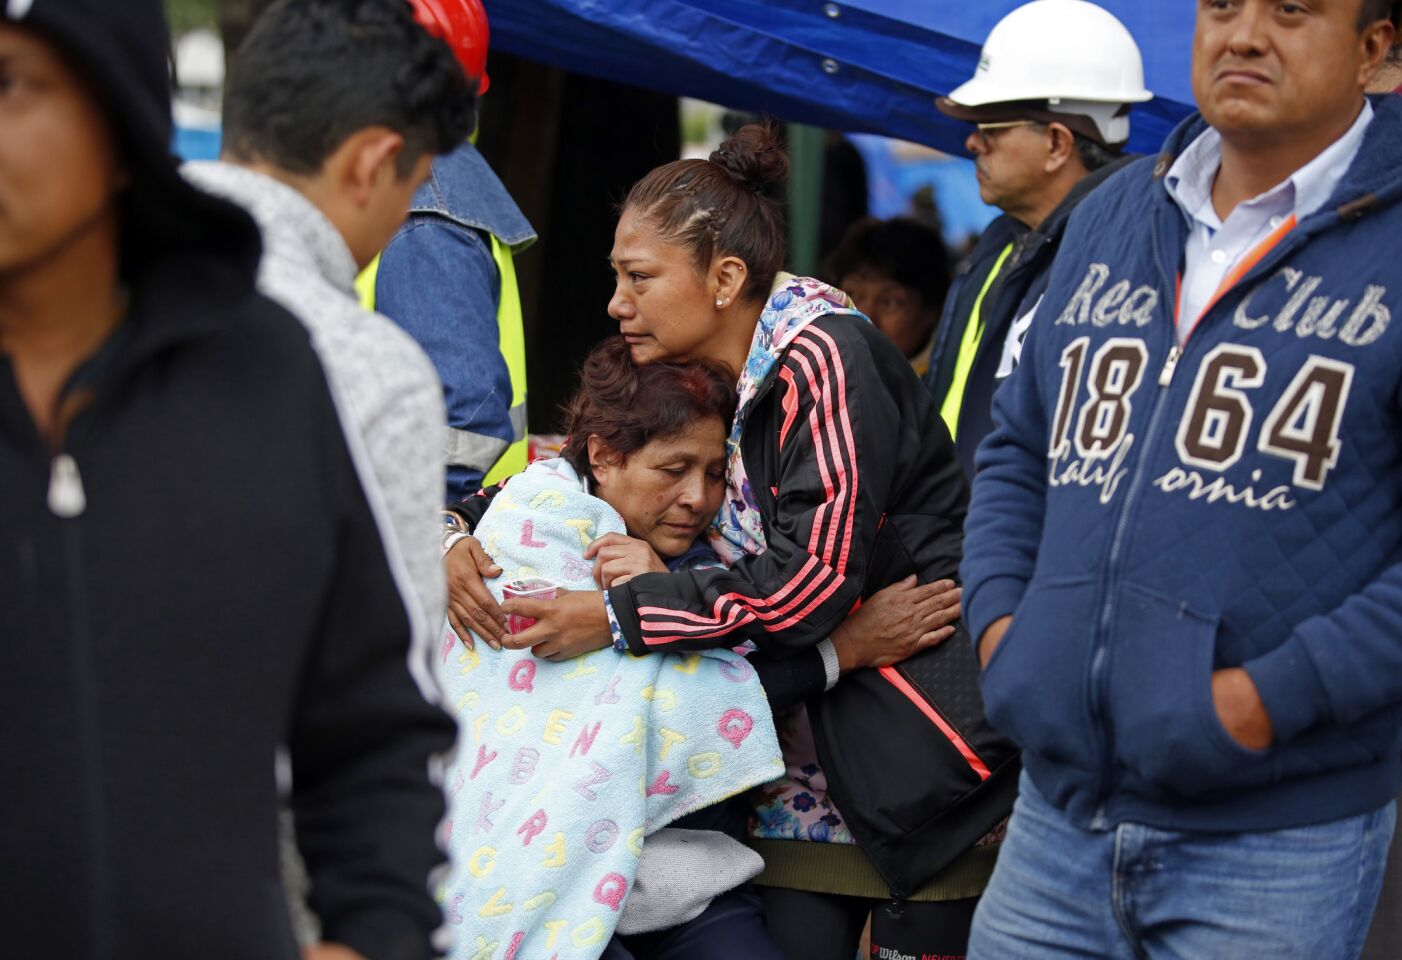 In Mexico, scenes of desolation and hope as the death toll reaches 274 ...